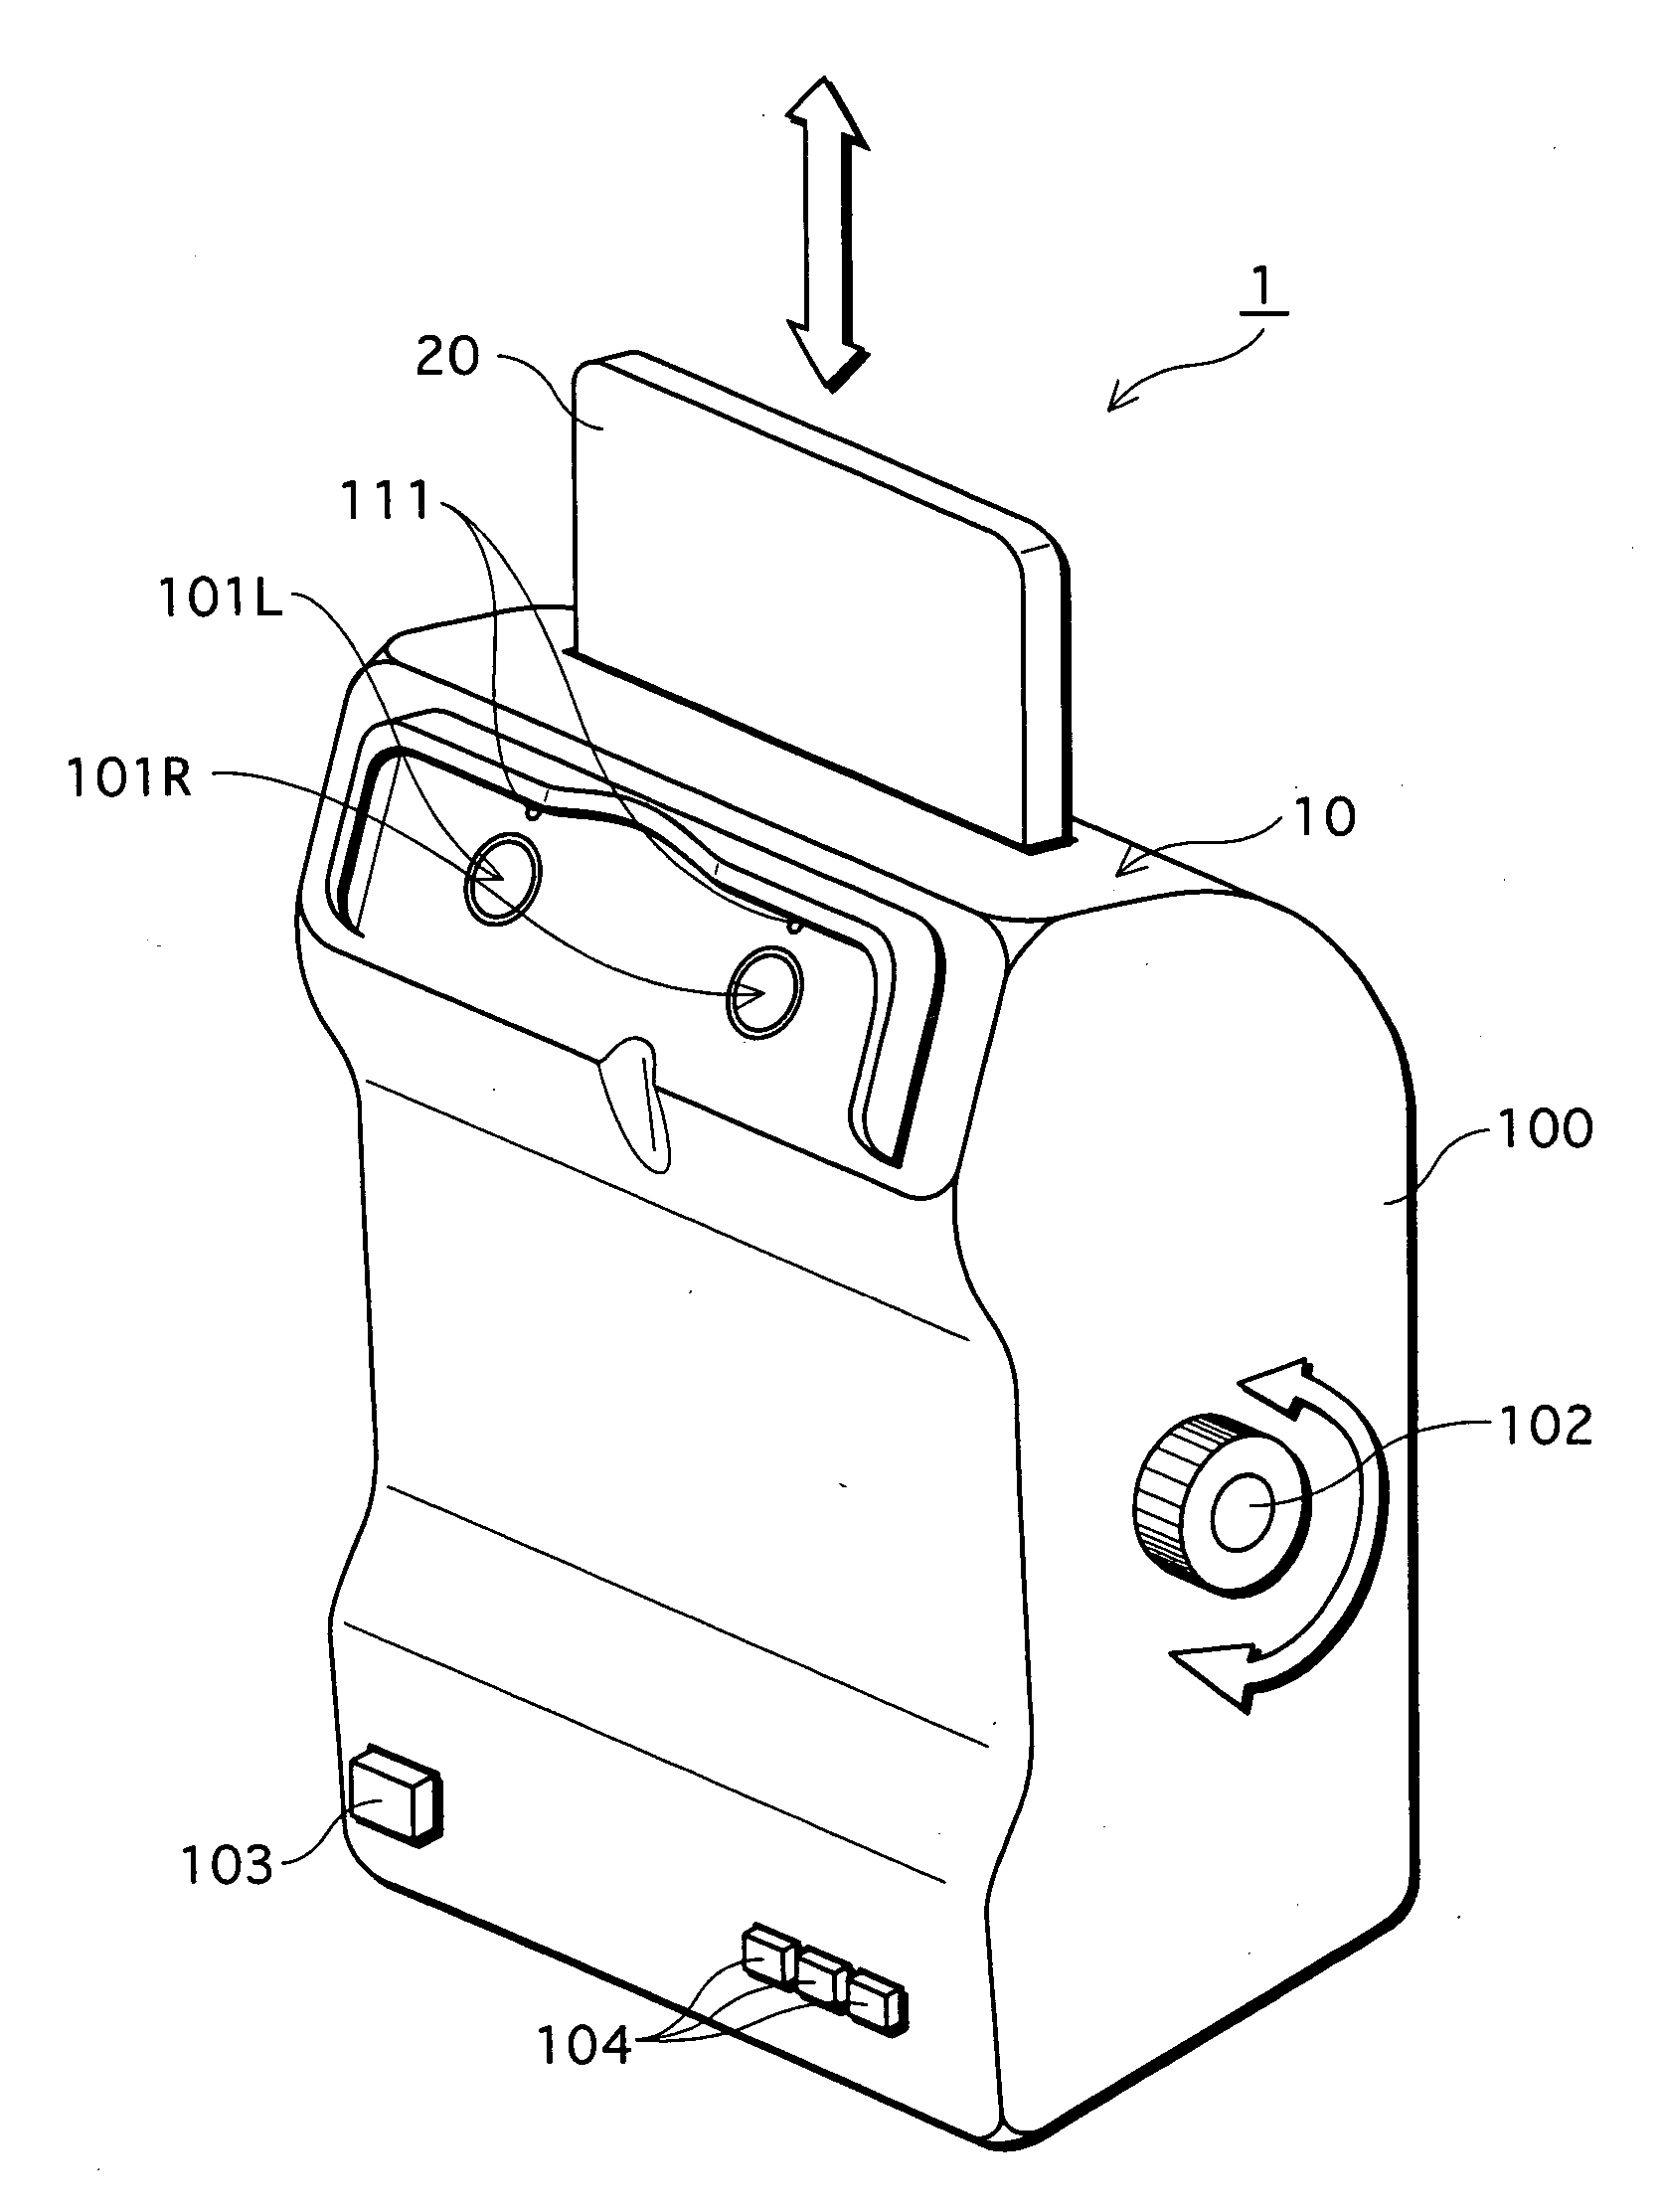 Pupil Reaction Ascertaining Device and Fatigue Recovery Promoting Device